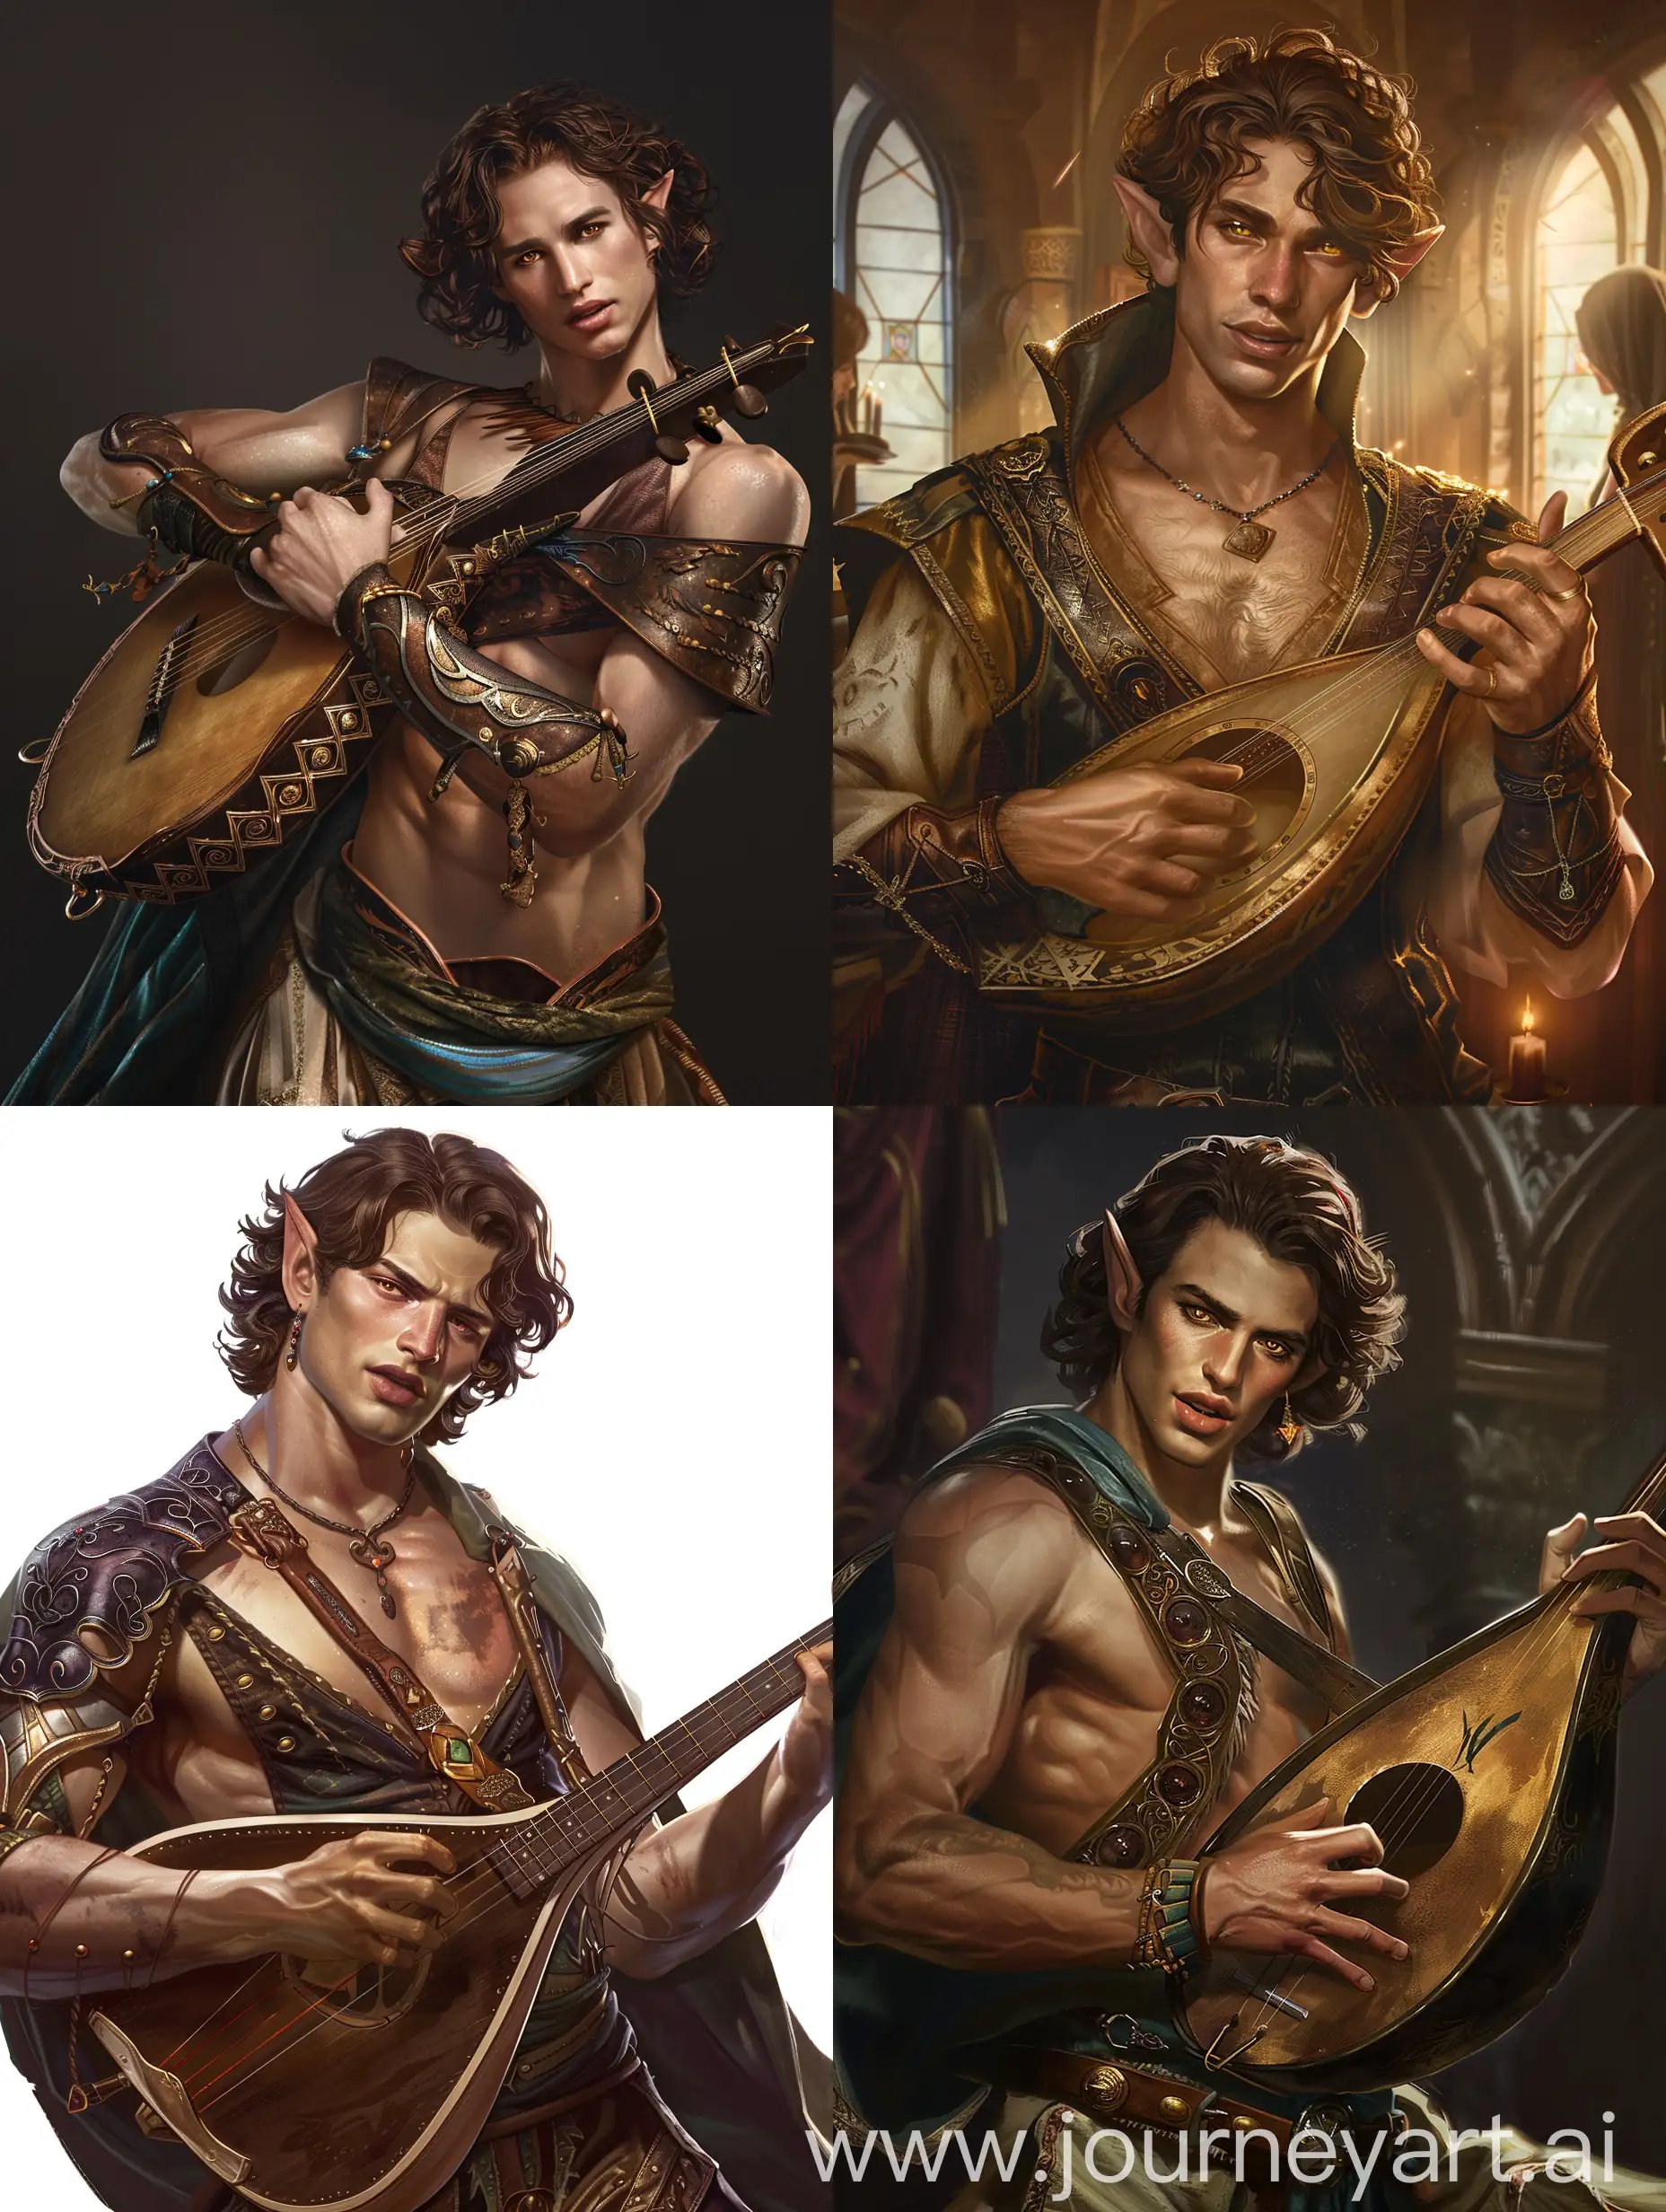 A male half-elf bard in an open outfit, with brown hair, amber eyes, plump lips, a curvy body and a mysterious look at the camera plays the lute in the style of the game Pathfinder: Wrath of the Righteous